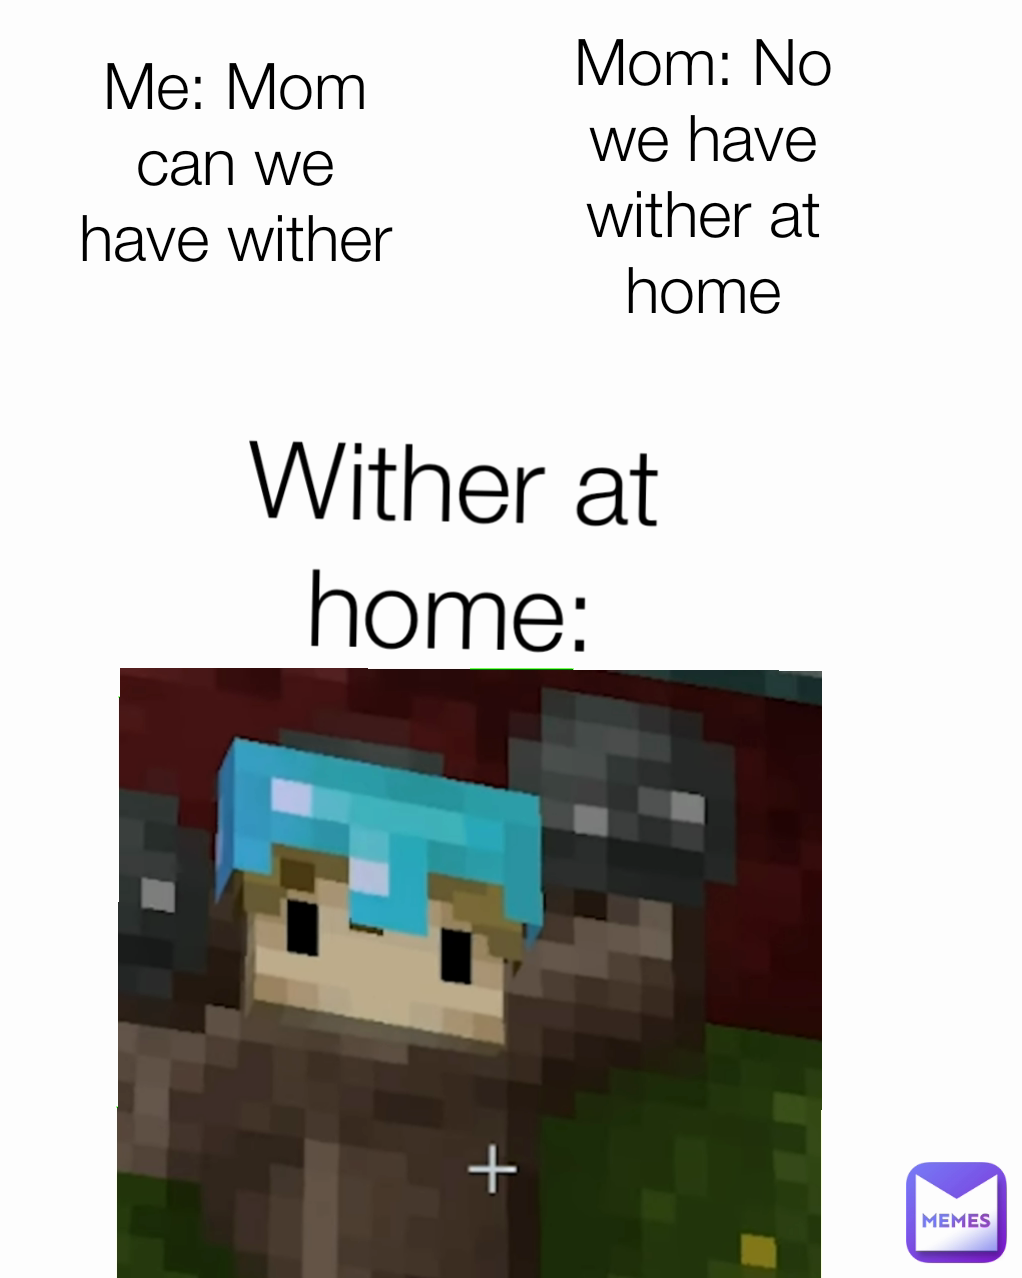 Mom: No we have wither at home Wither at home: Me: Mom can we have wither